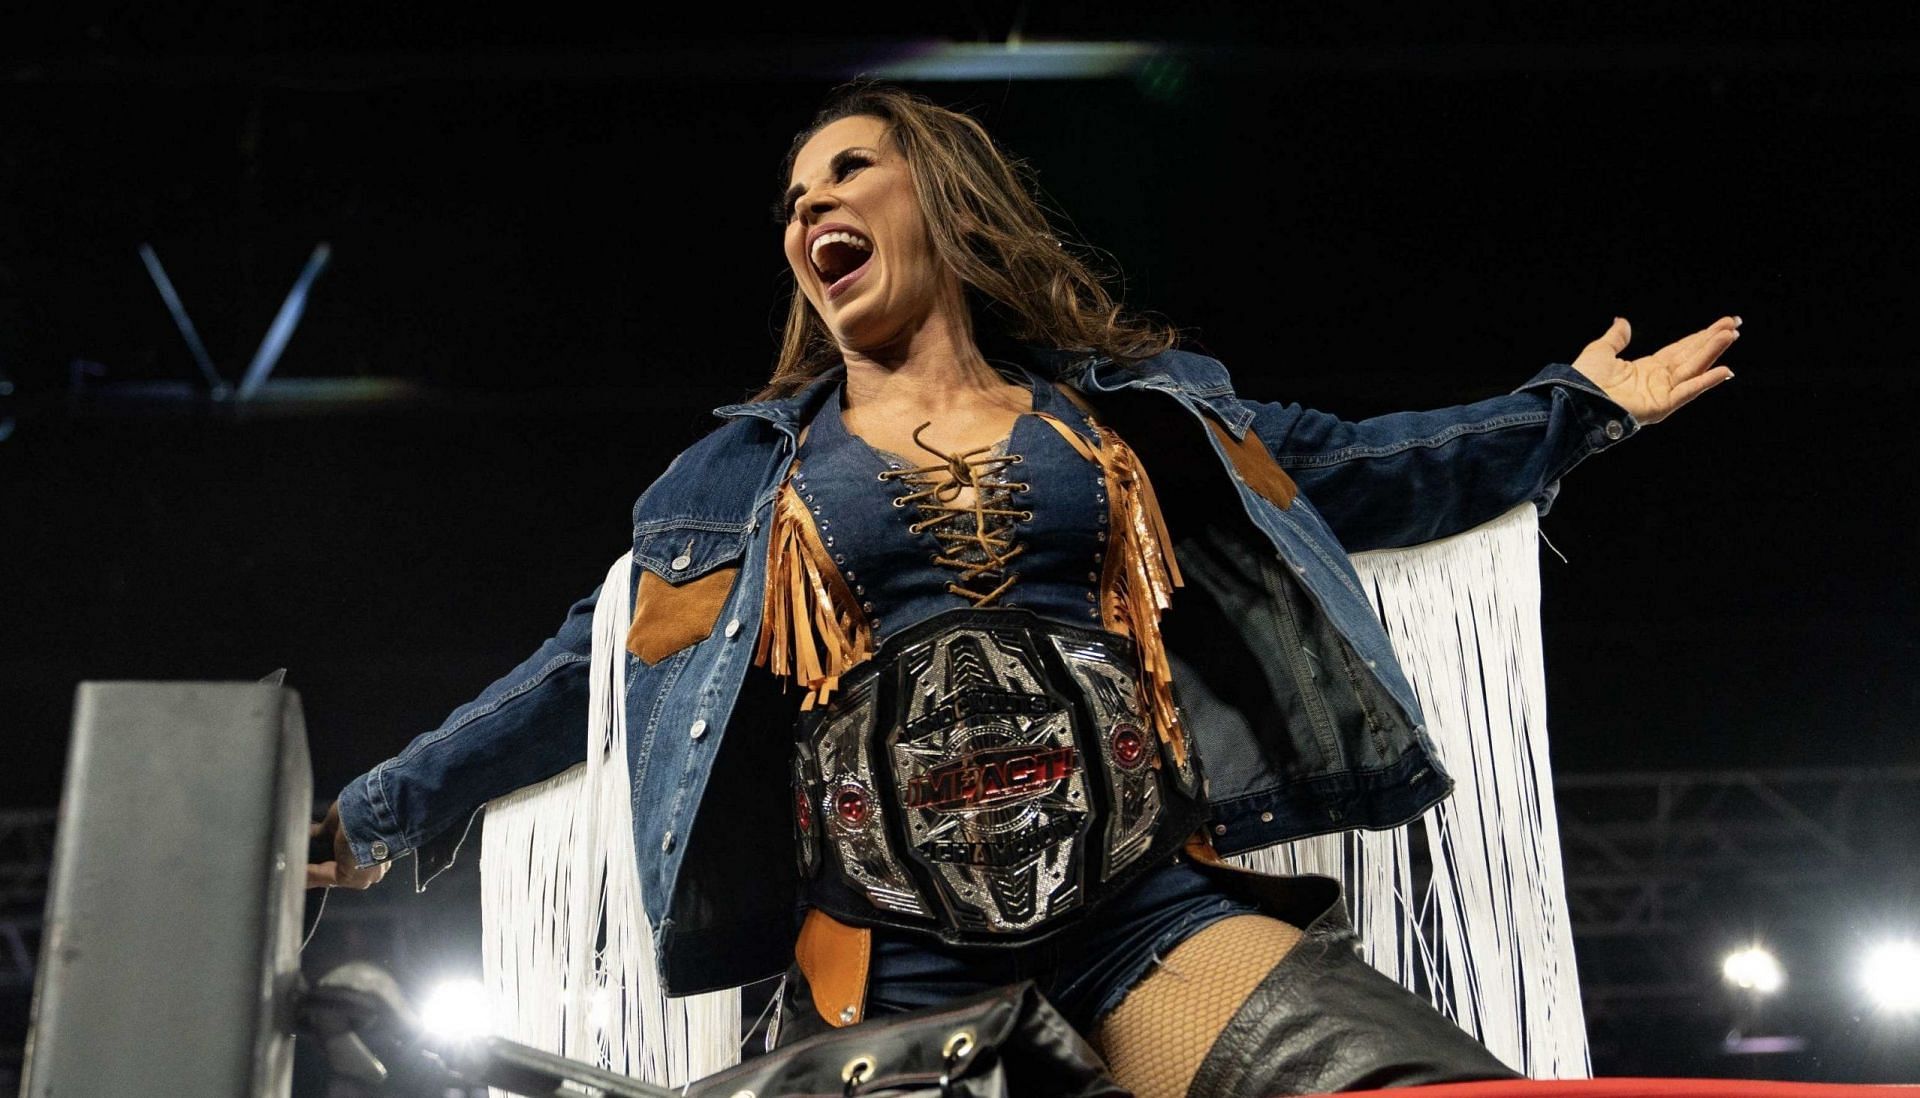 Mickie James was announced for the Royal Rumble